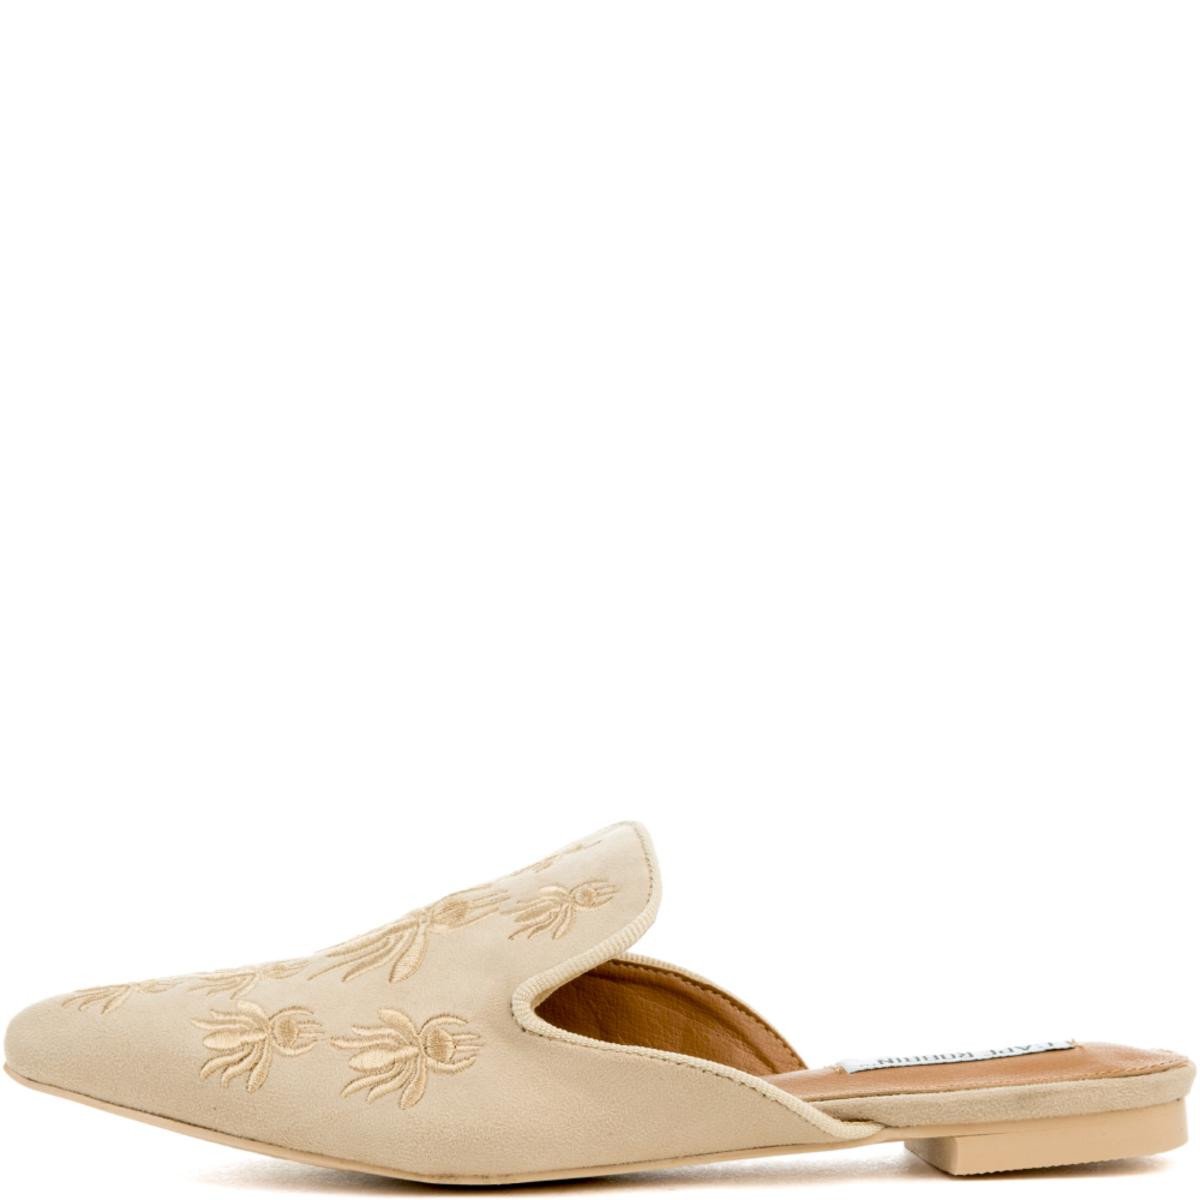 Cape Robbin Cell-18 Beige Mules Nude